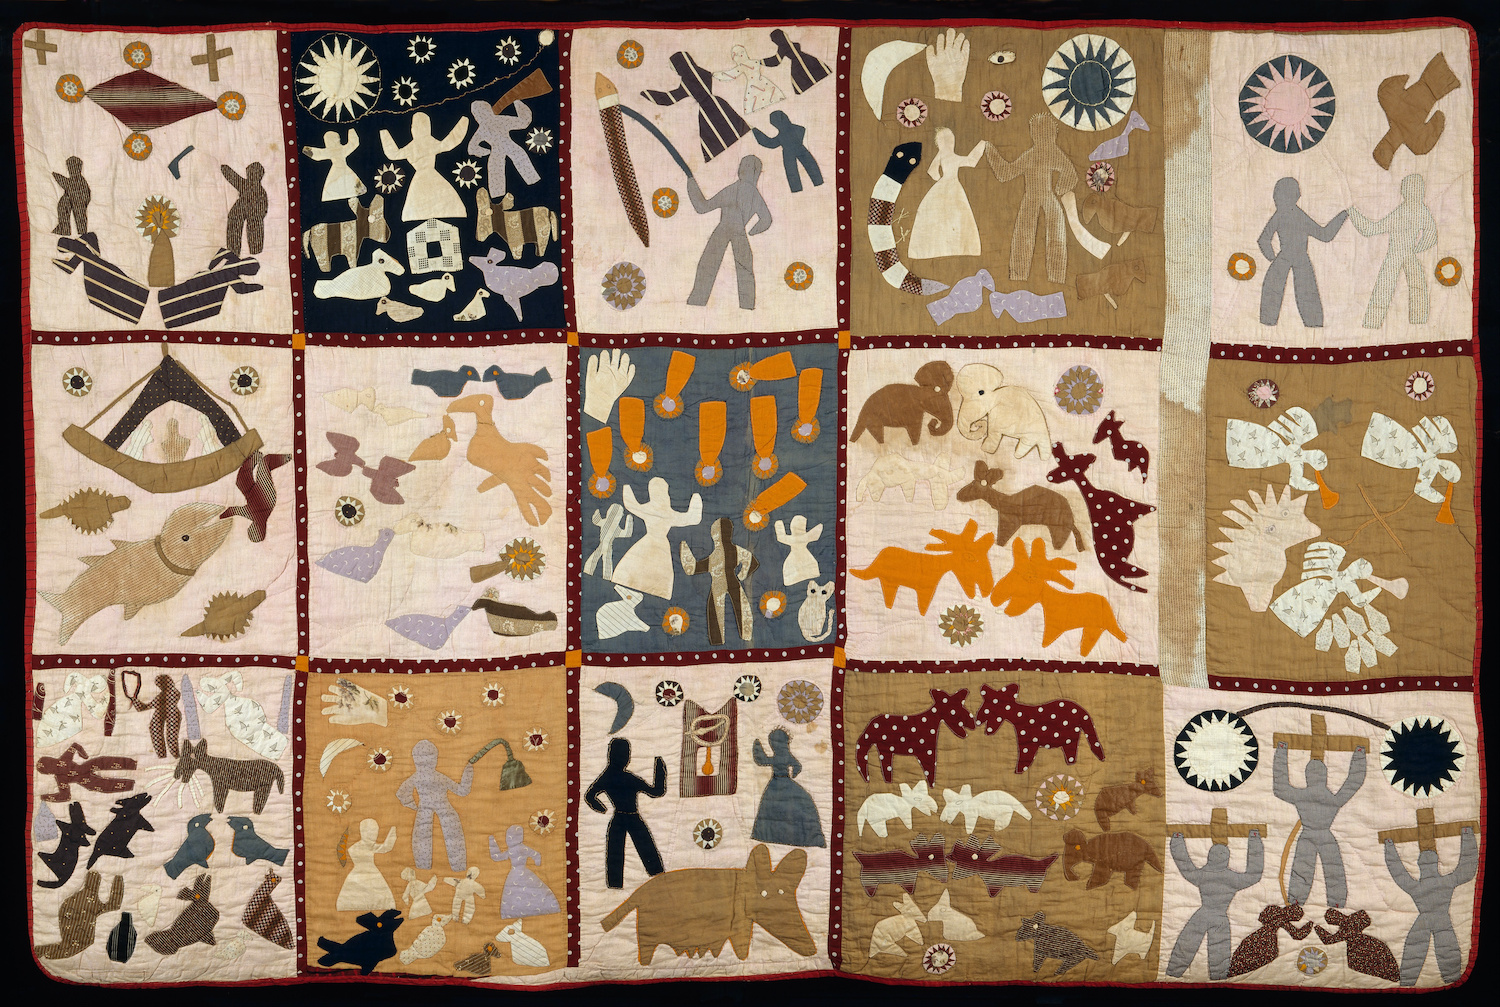 Pictorial quilt by Harriet Powers - 1895–98 - 175 x 266.7 cm Museum of Fine Arts